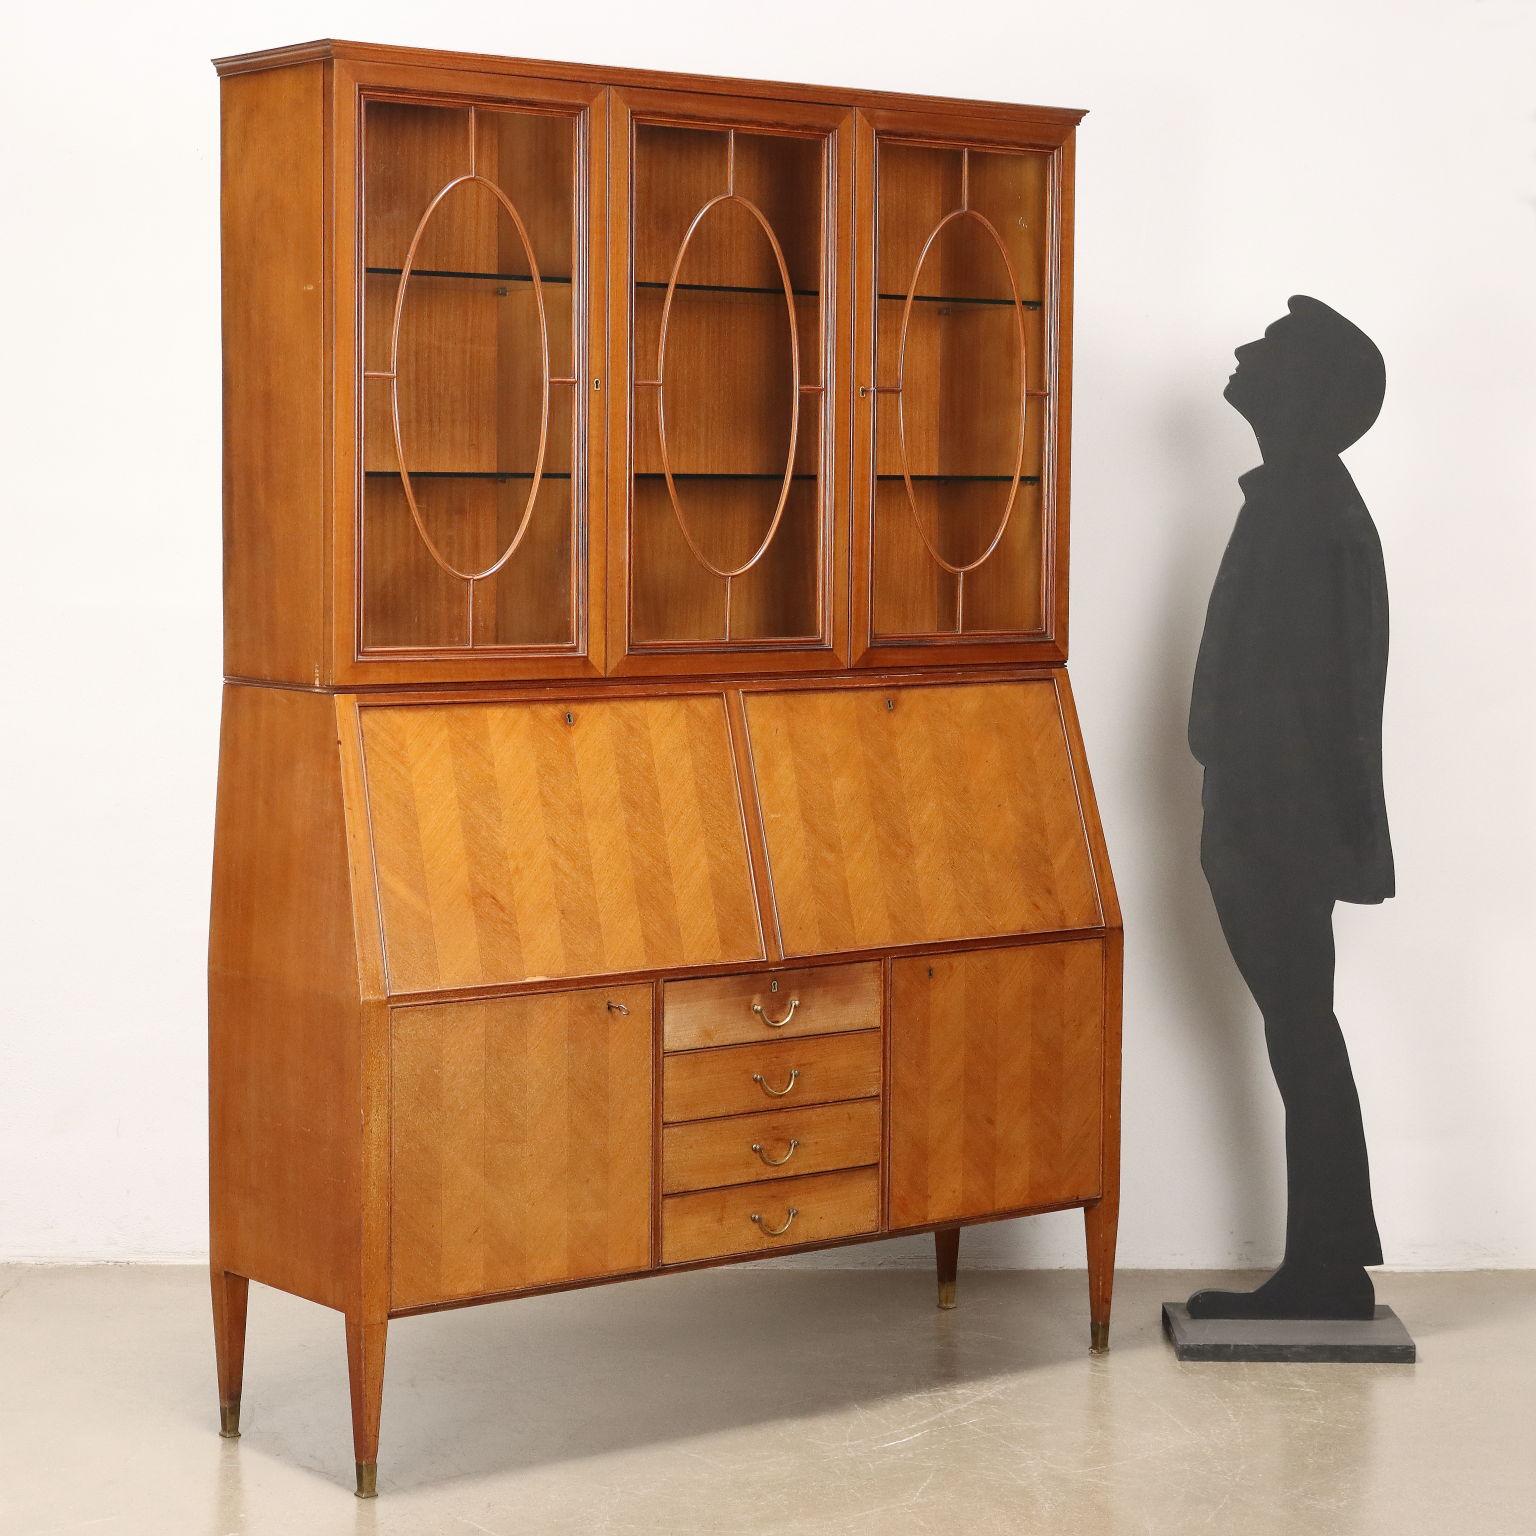 Showcase with hinged doors and exposed drawers, writing compartments with flap. Exotic wood veneer, brass ferrules. 